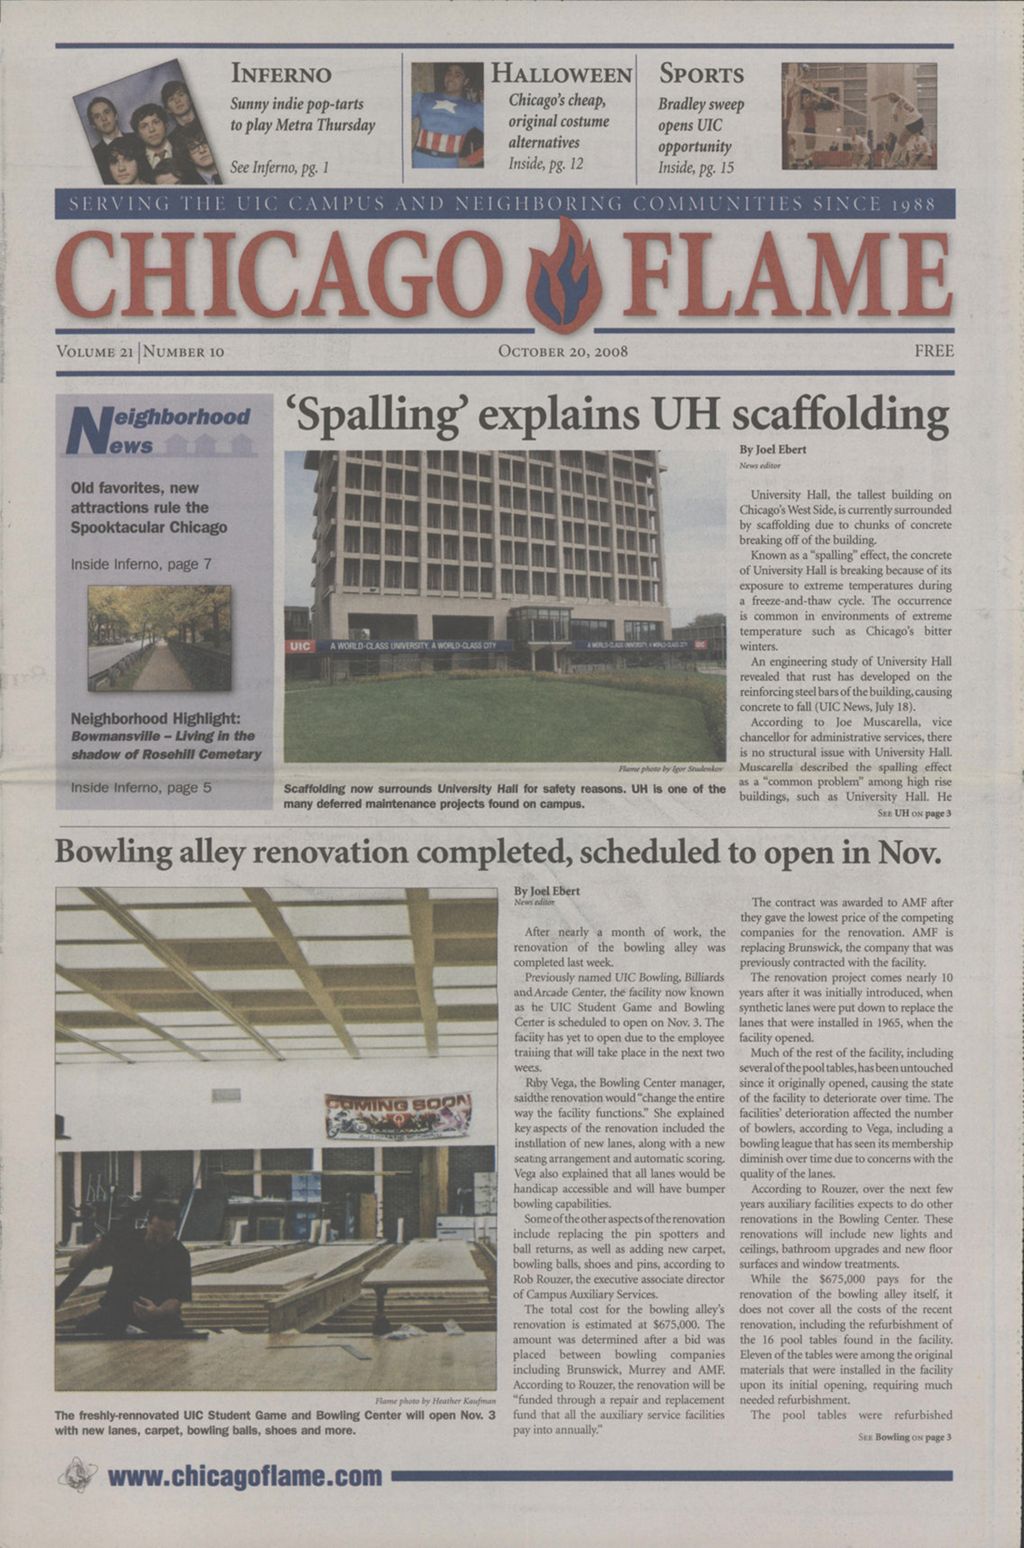 Miniature of Chicago Flame (October 20, 2008)